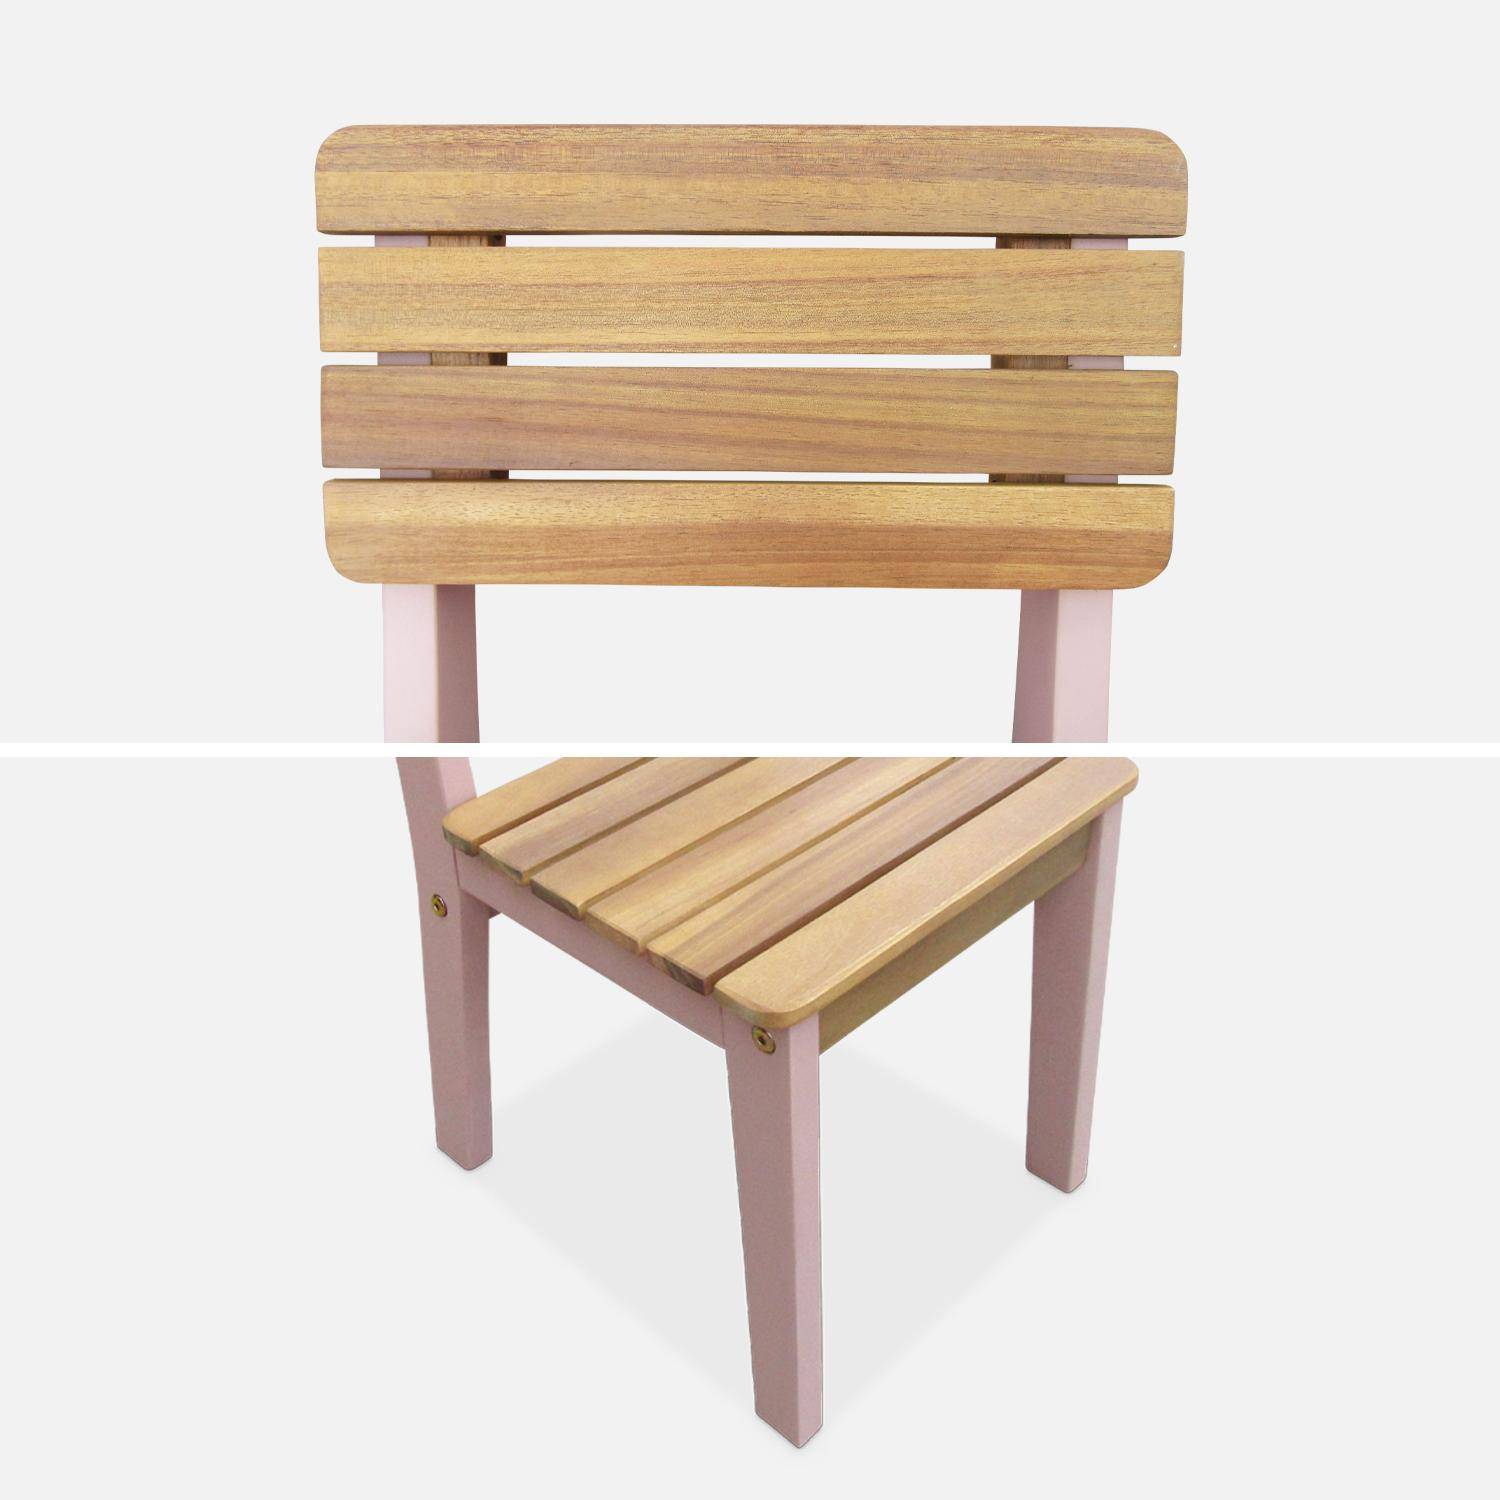 Solid Wood Chairs for Children, Indoor/Outdoor (Set of 2), pink, L29 x D31.5 x H53 cm Photo6